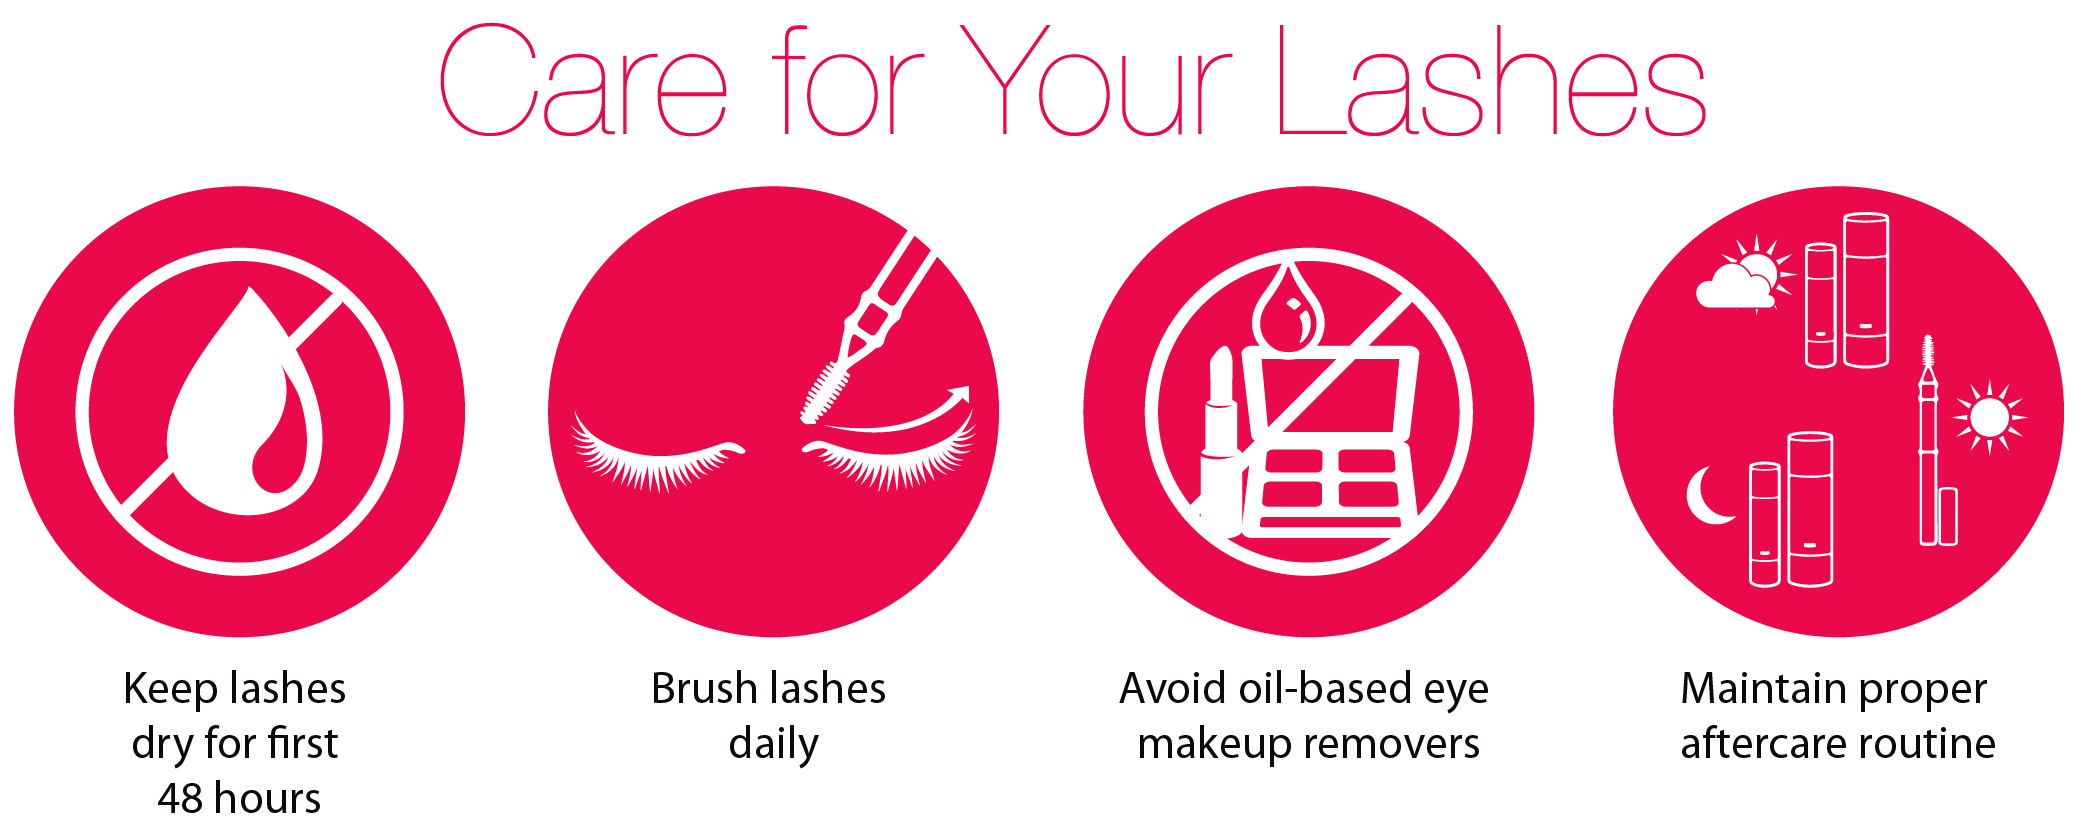 how to care for your lashes